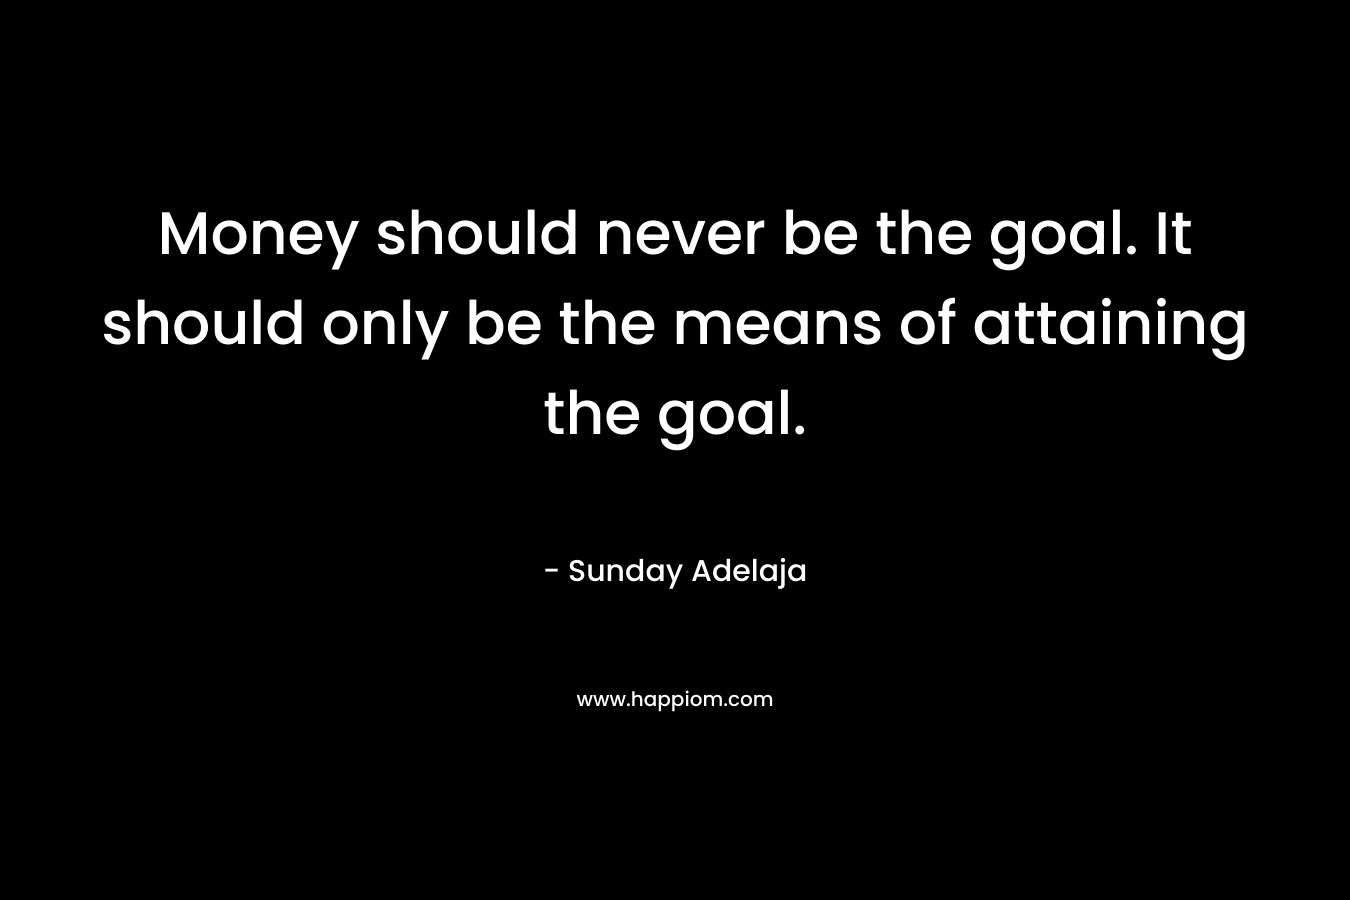 Money should never be the goal. It should only be the means of attaining the goal. – Sunday Adelaja